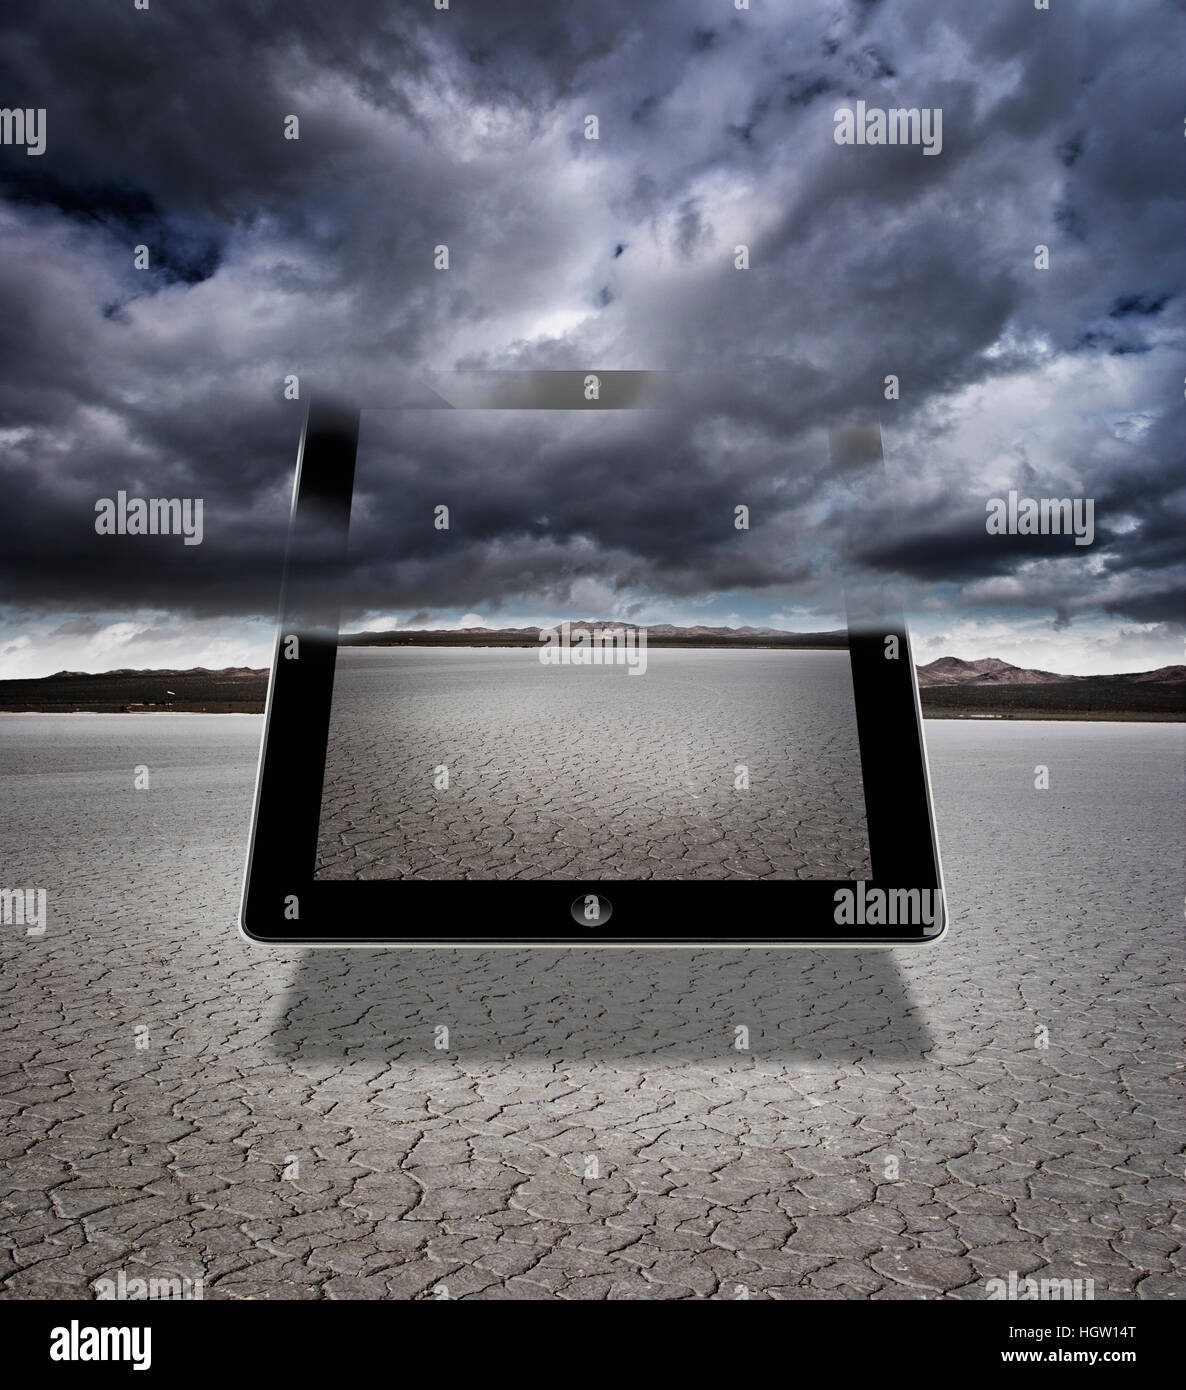 Composite Of A Digital Tablet With Storm Clouds In A Dry Lakebed Stock Photo